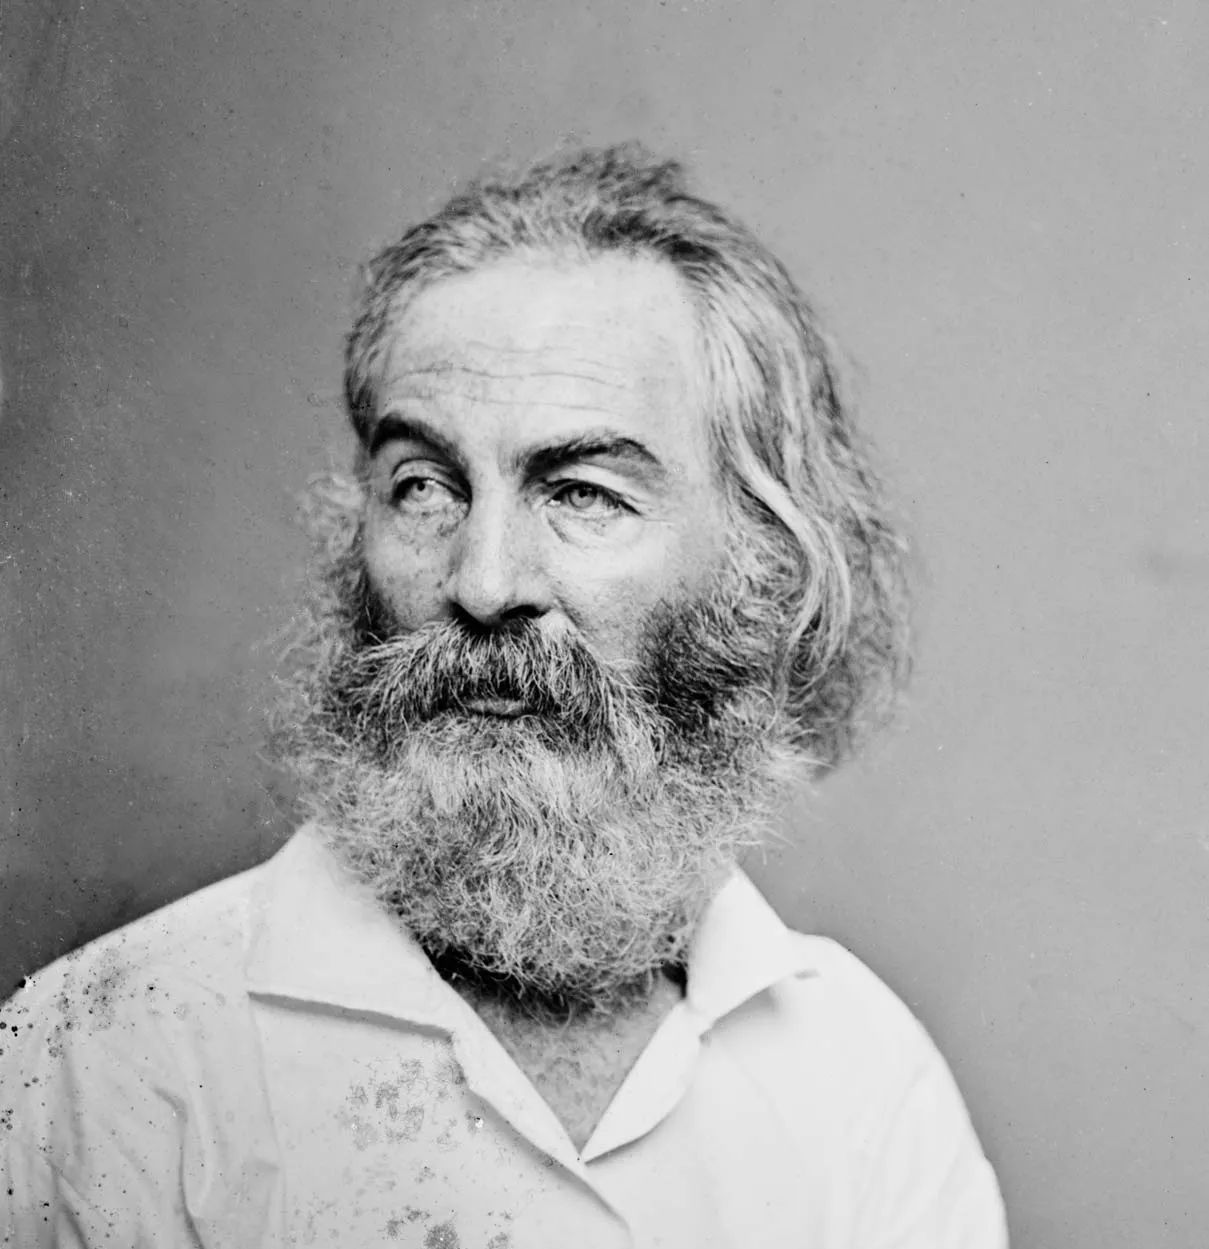 Black and white portrait of and older Walt Whitman with a large beard.